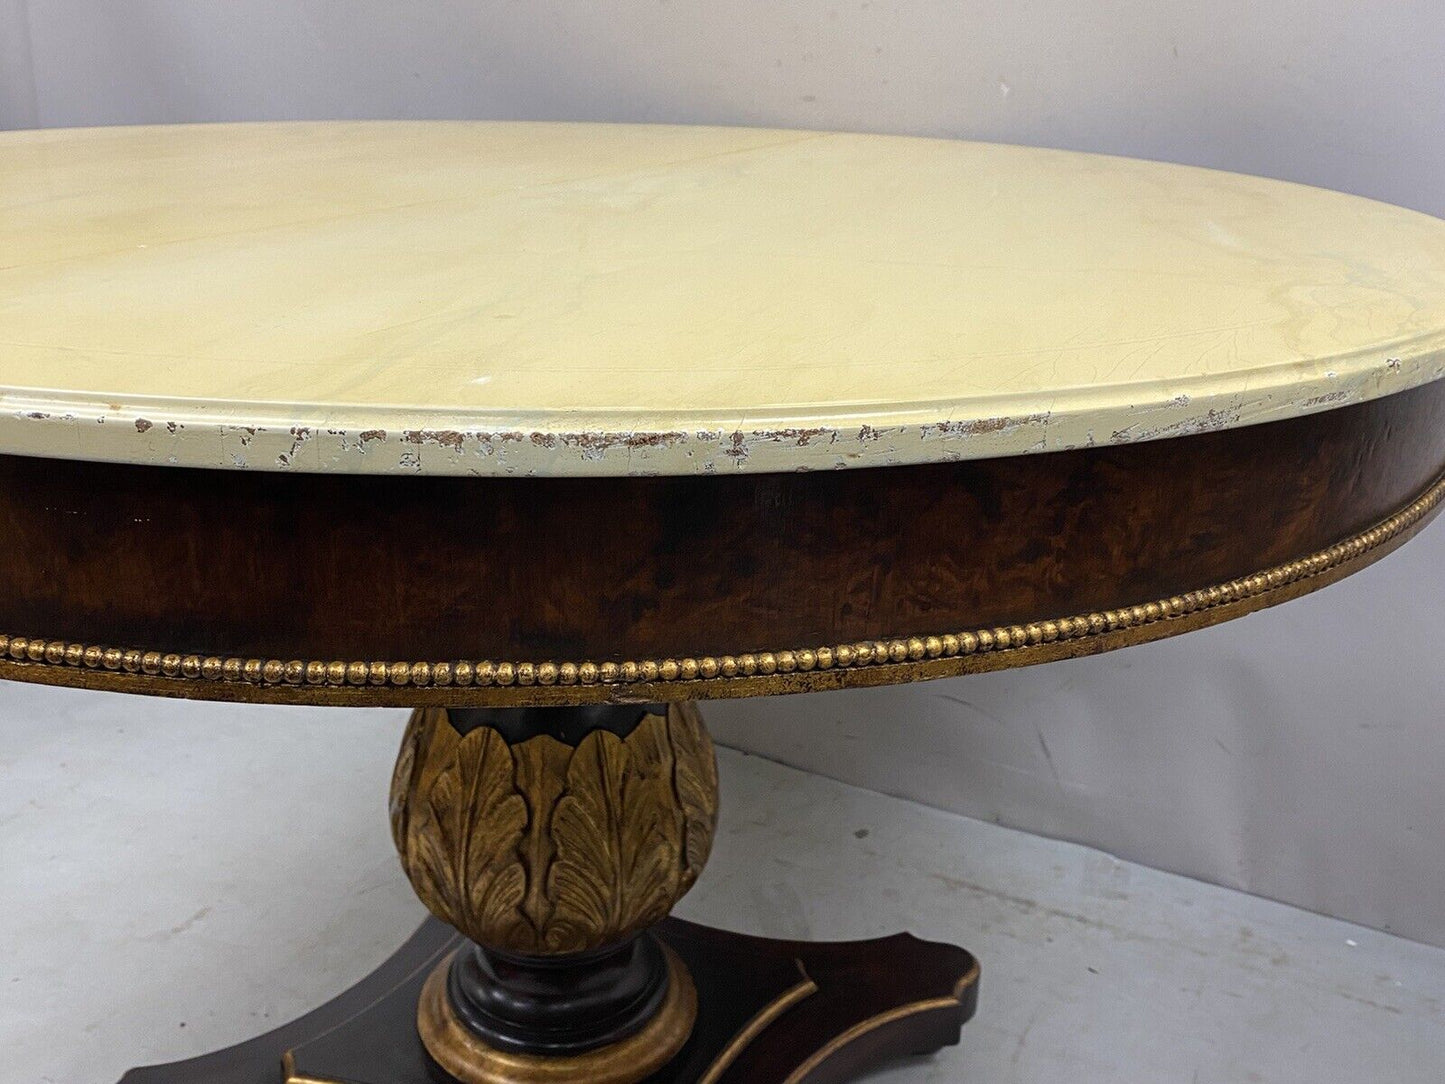 Vintage Italian Regency Style Pedestal Base Round Dining Table Cream Lacquer Top